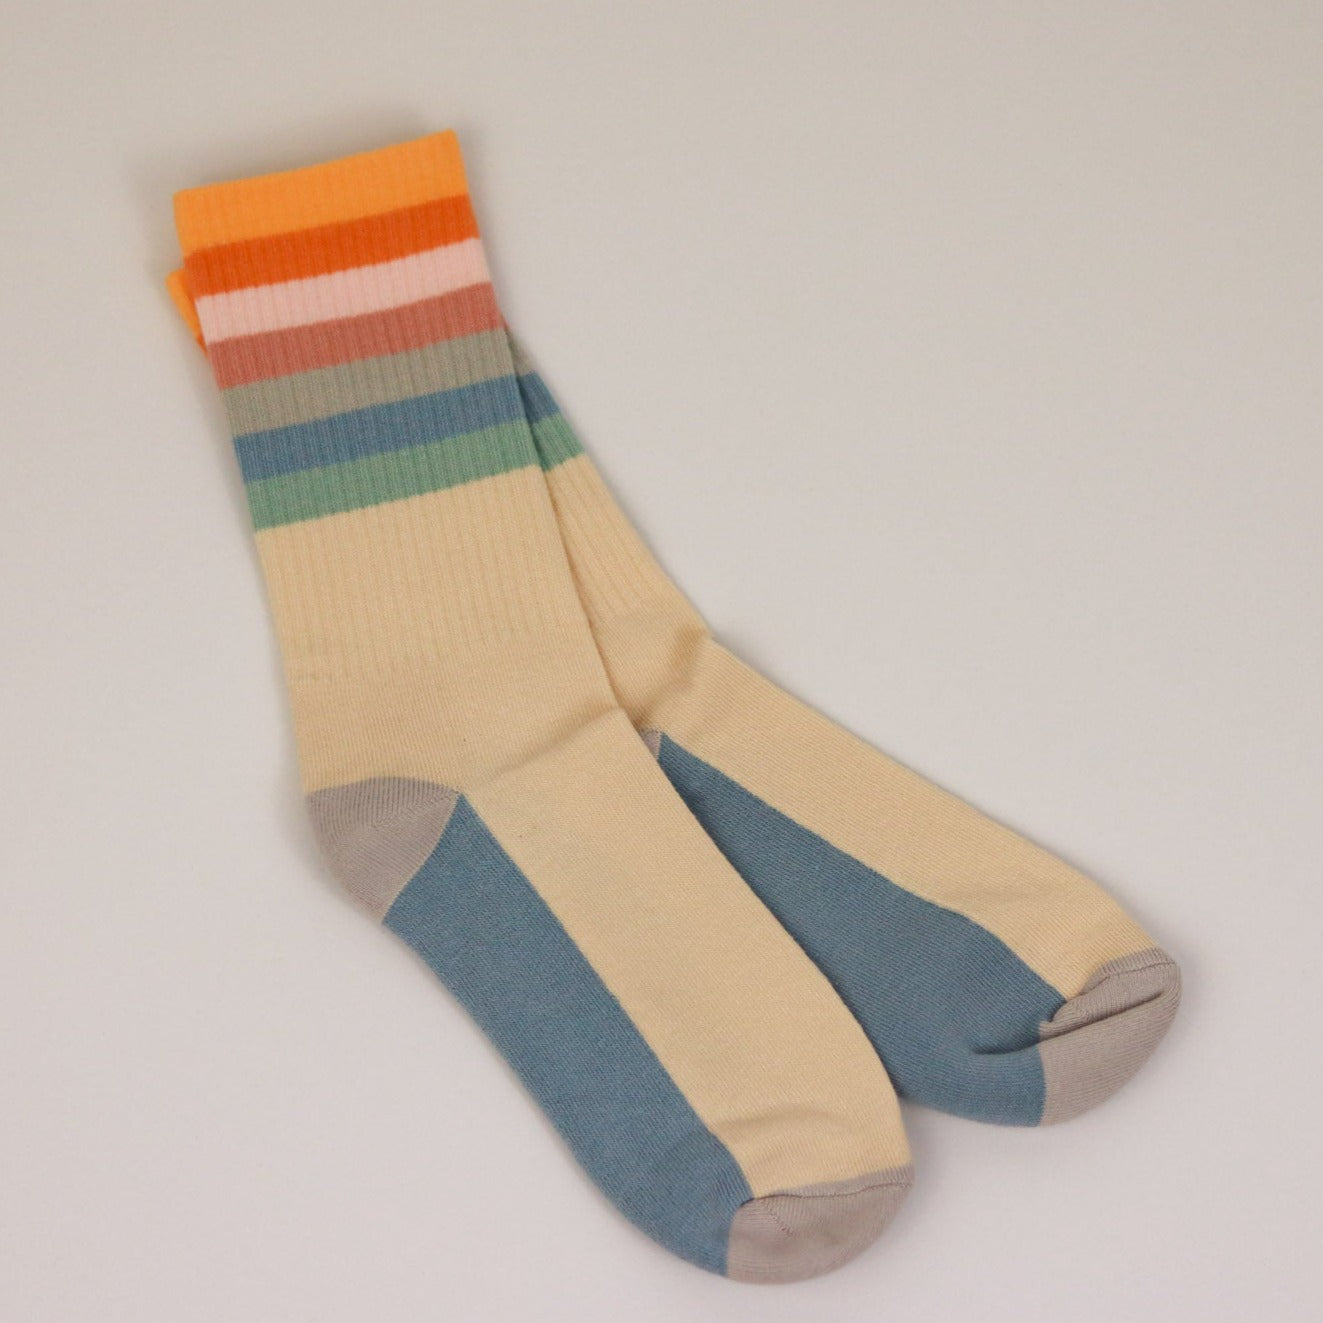 Thick and Comfy Retro-striped Socks for Birthday Box